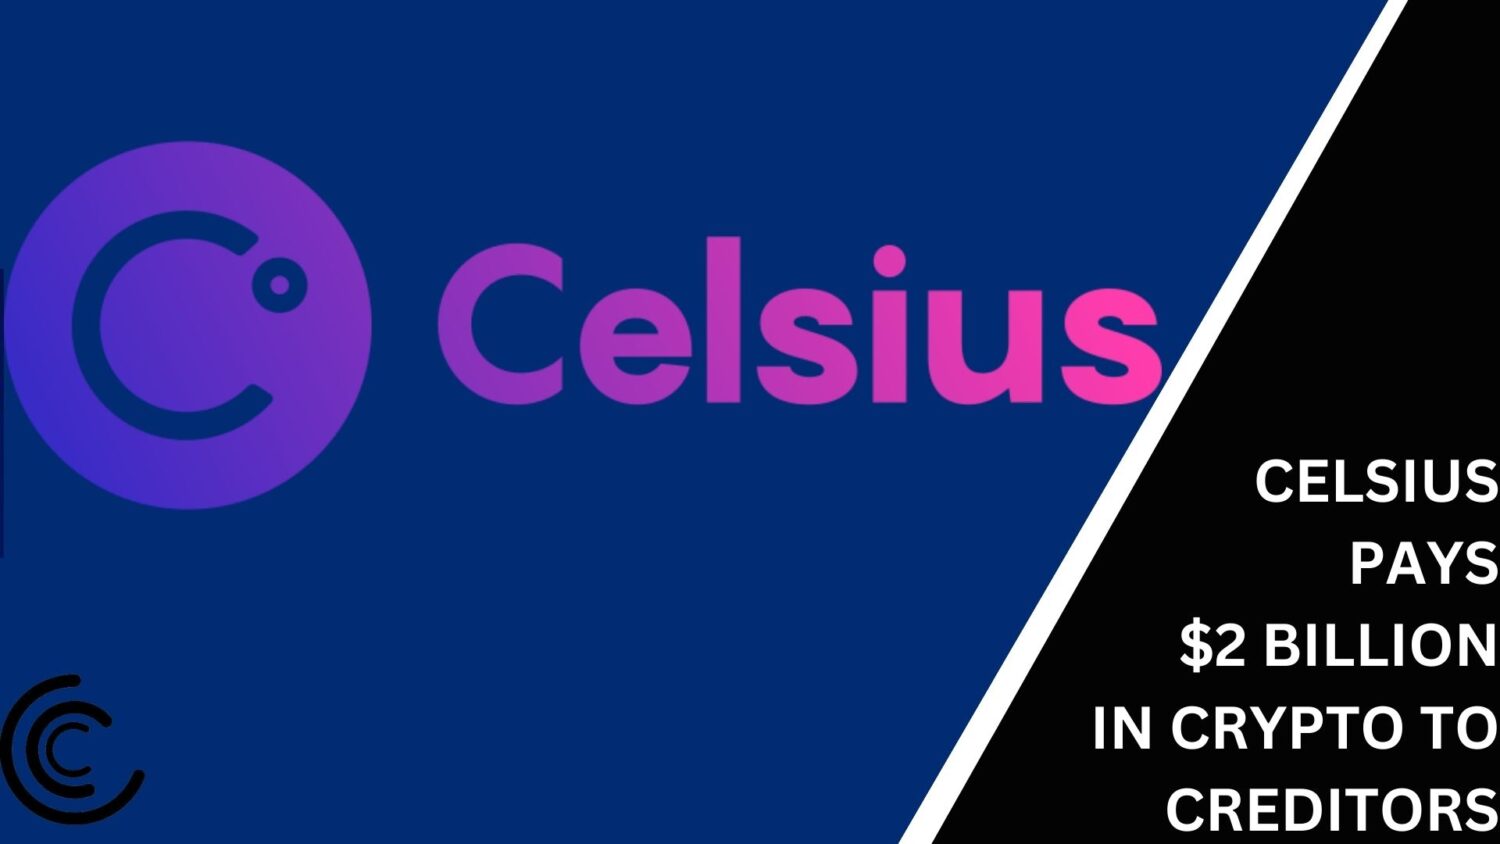 Celsius Pays $2 Billion In Crypto To Creditors